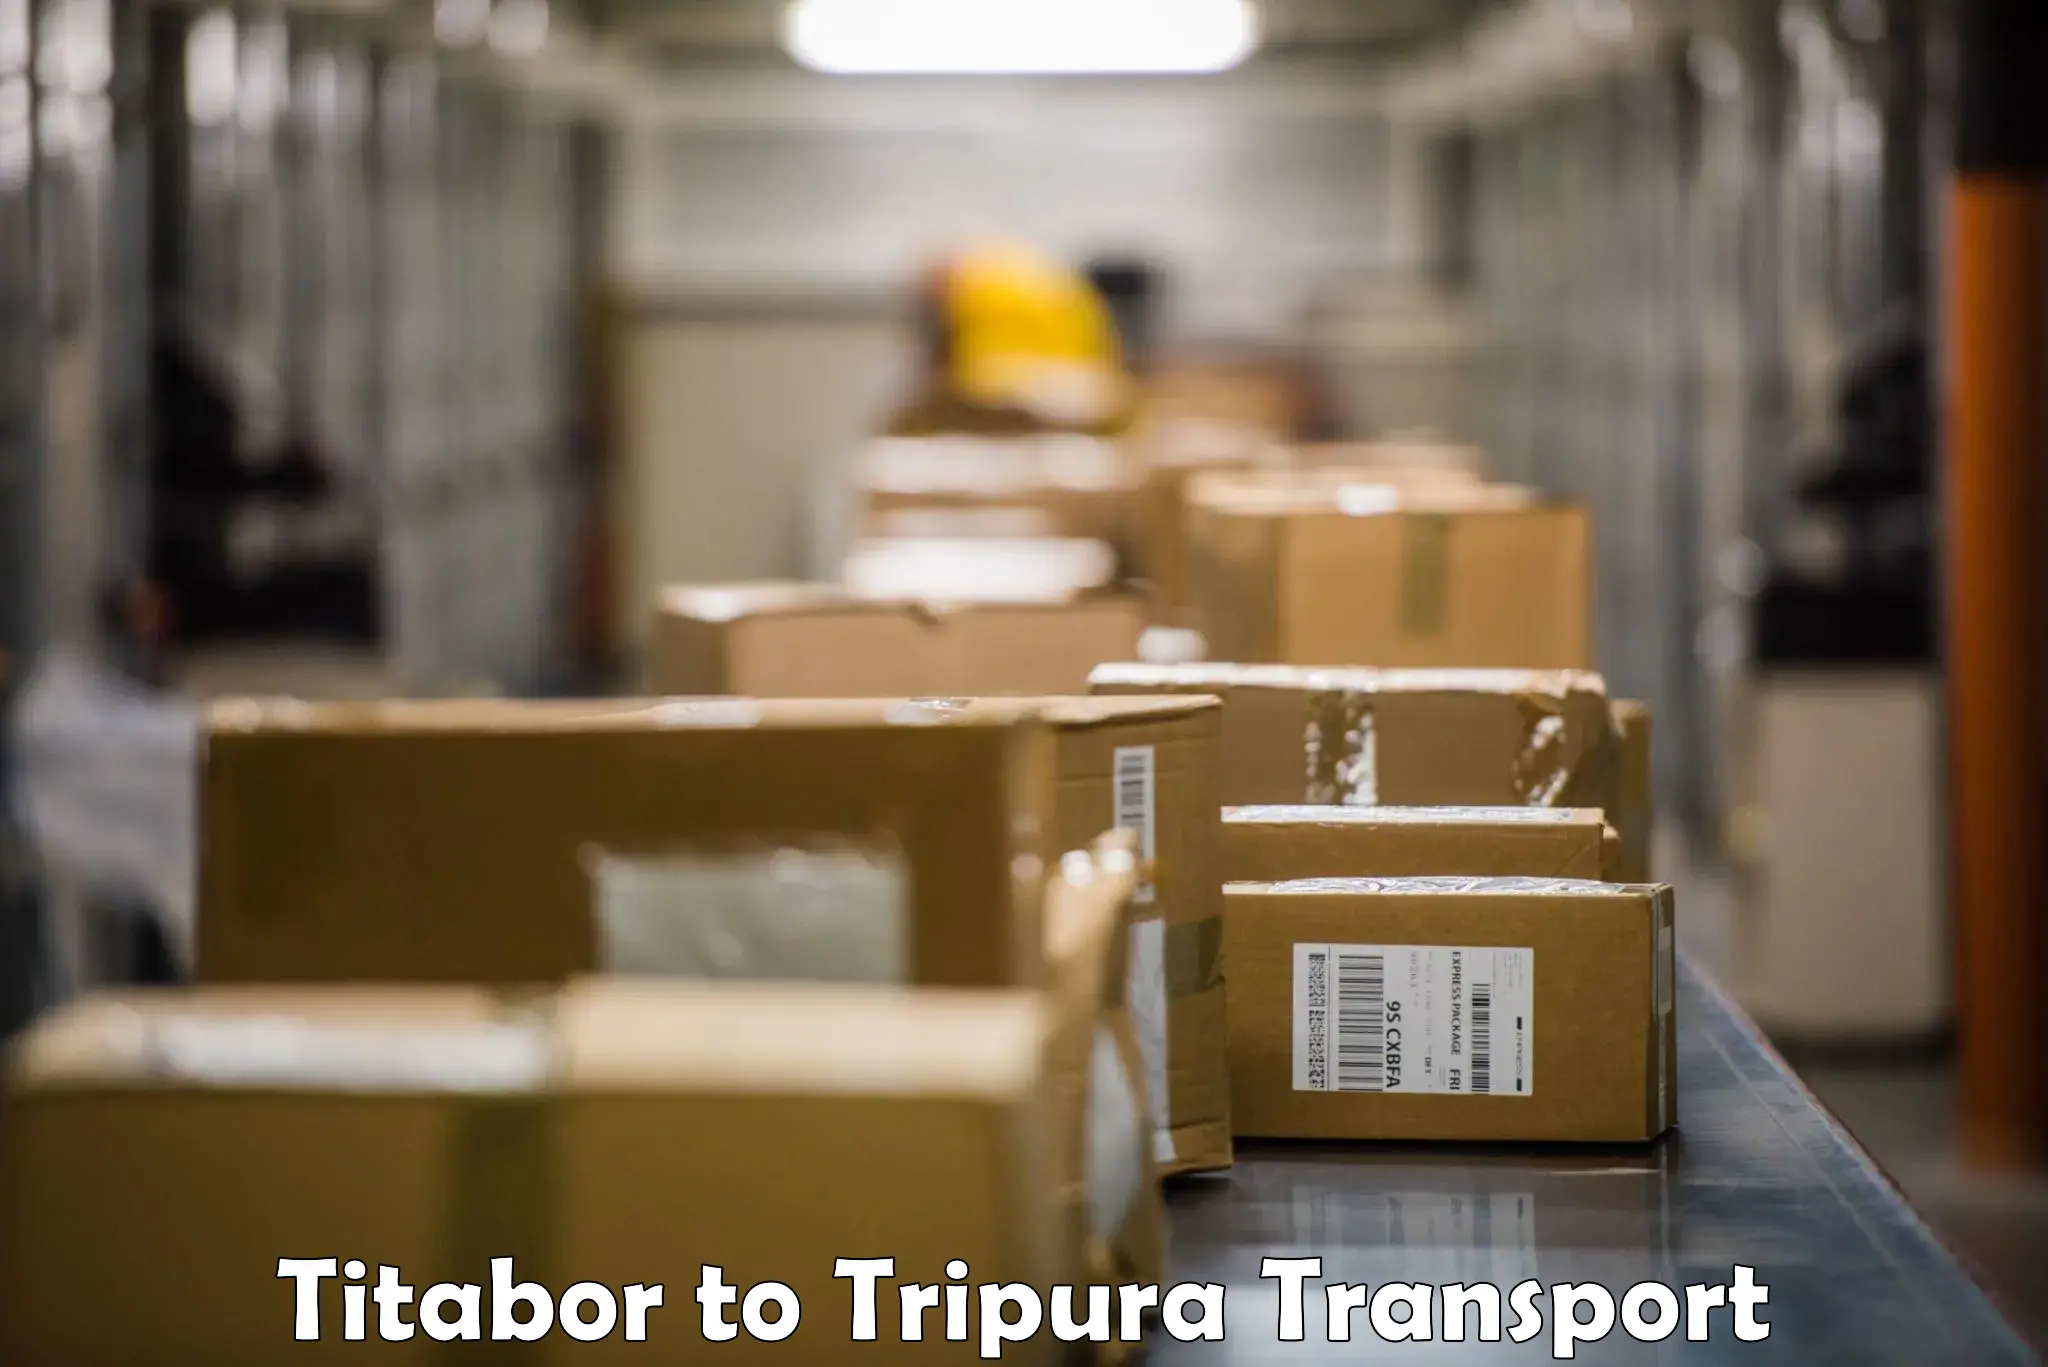 Cycle transportation service Titabor to South Tripura